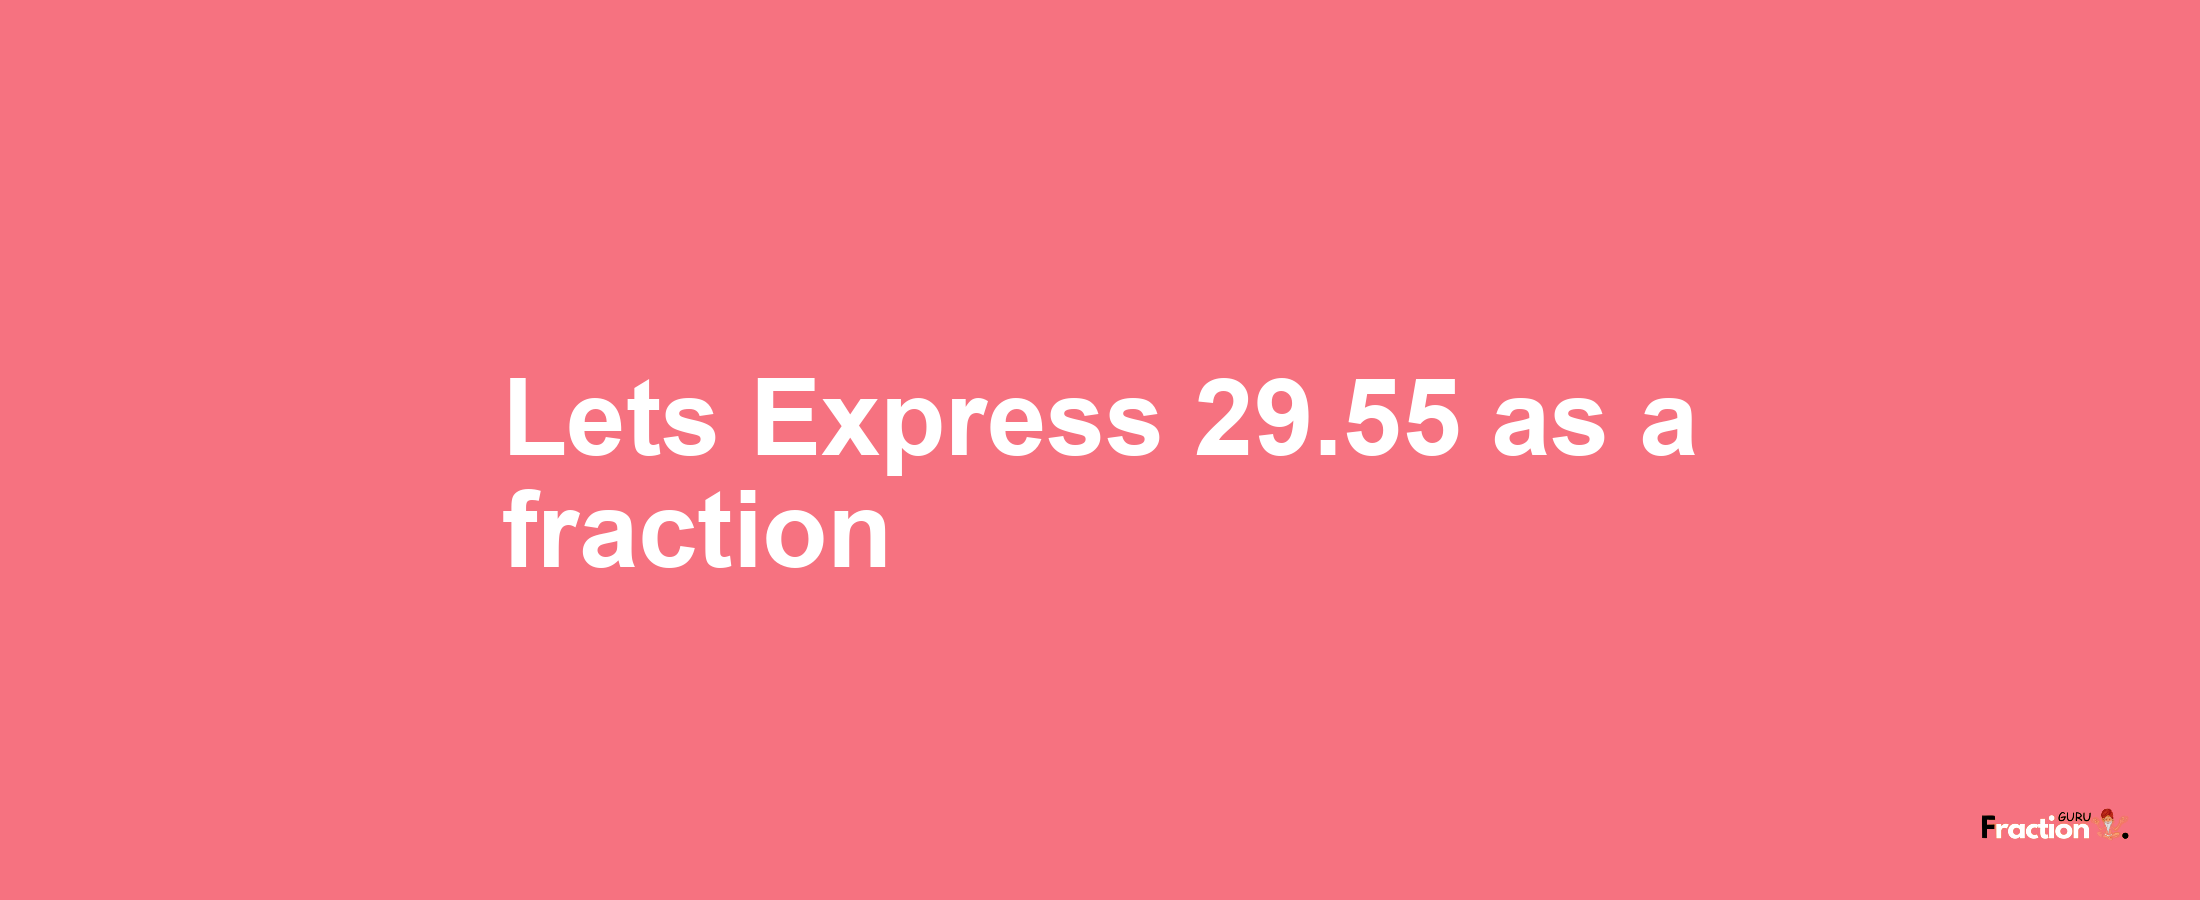 Lets Express 29.55 as afraction